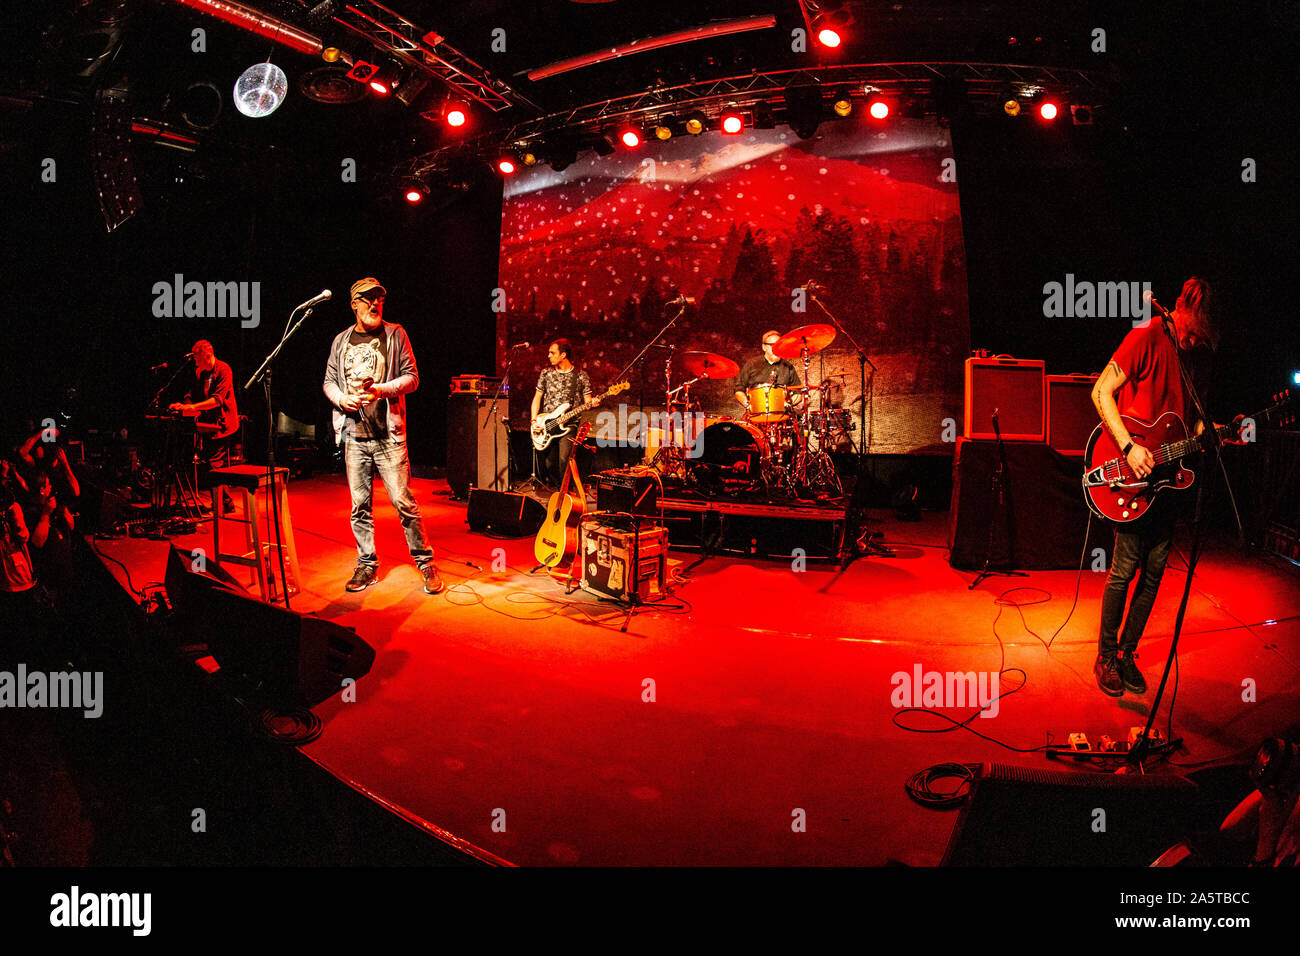 Milan Italy. 21 October 2019. The American alternative rock band CAKE performs live on stage at Alcatraz to present the imminent new album probably titled 'Age Of Aquarius'. Stock Photo